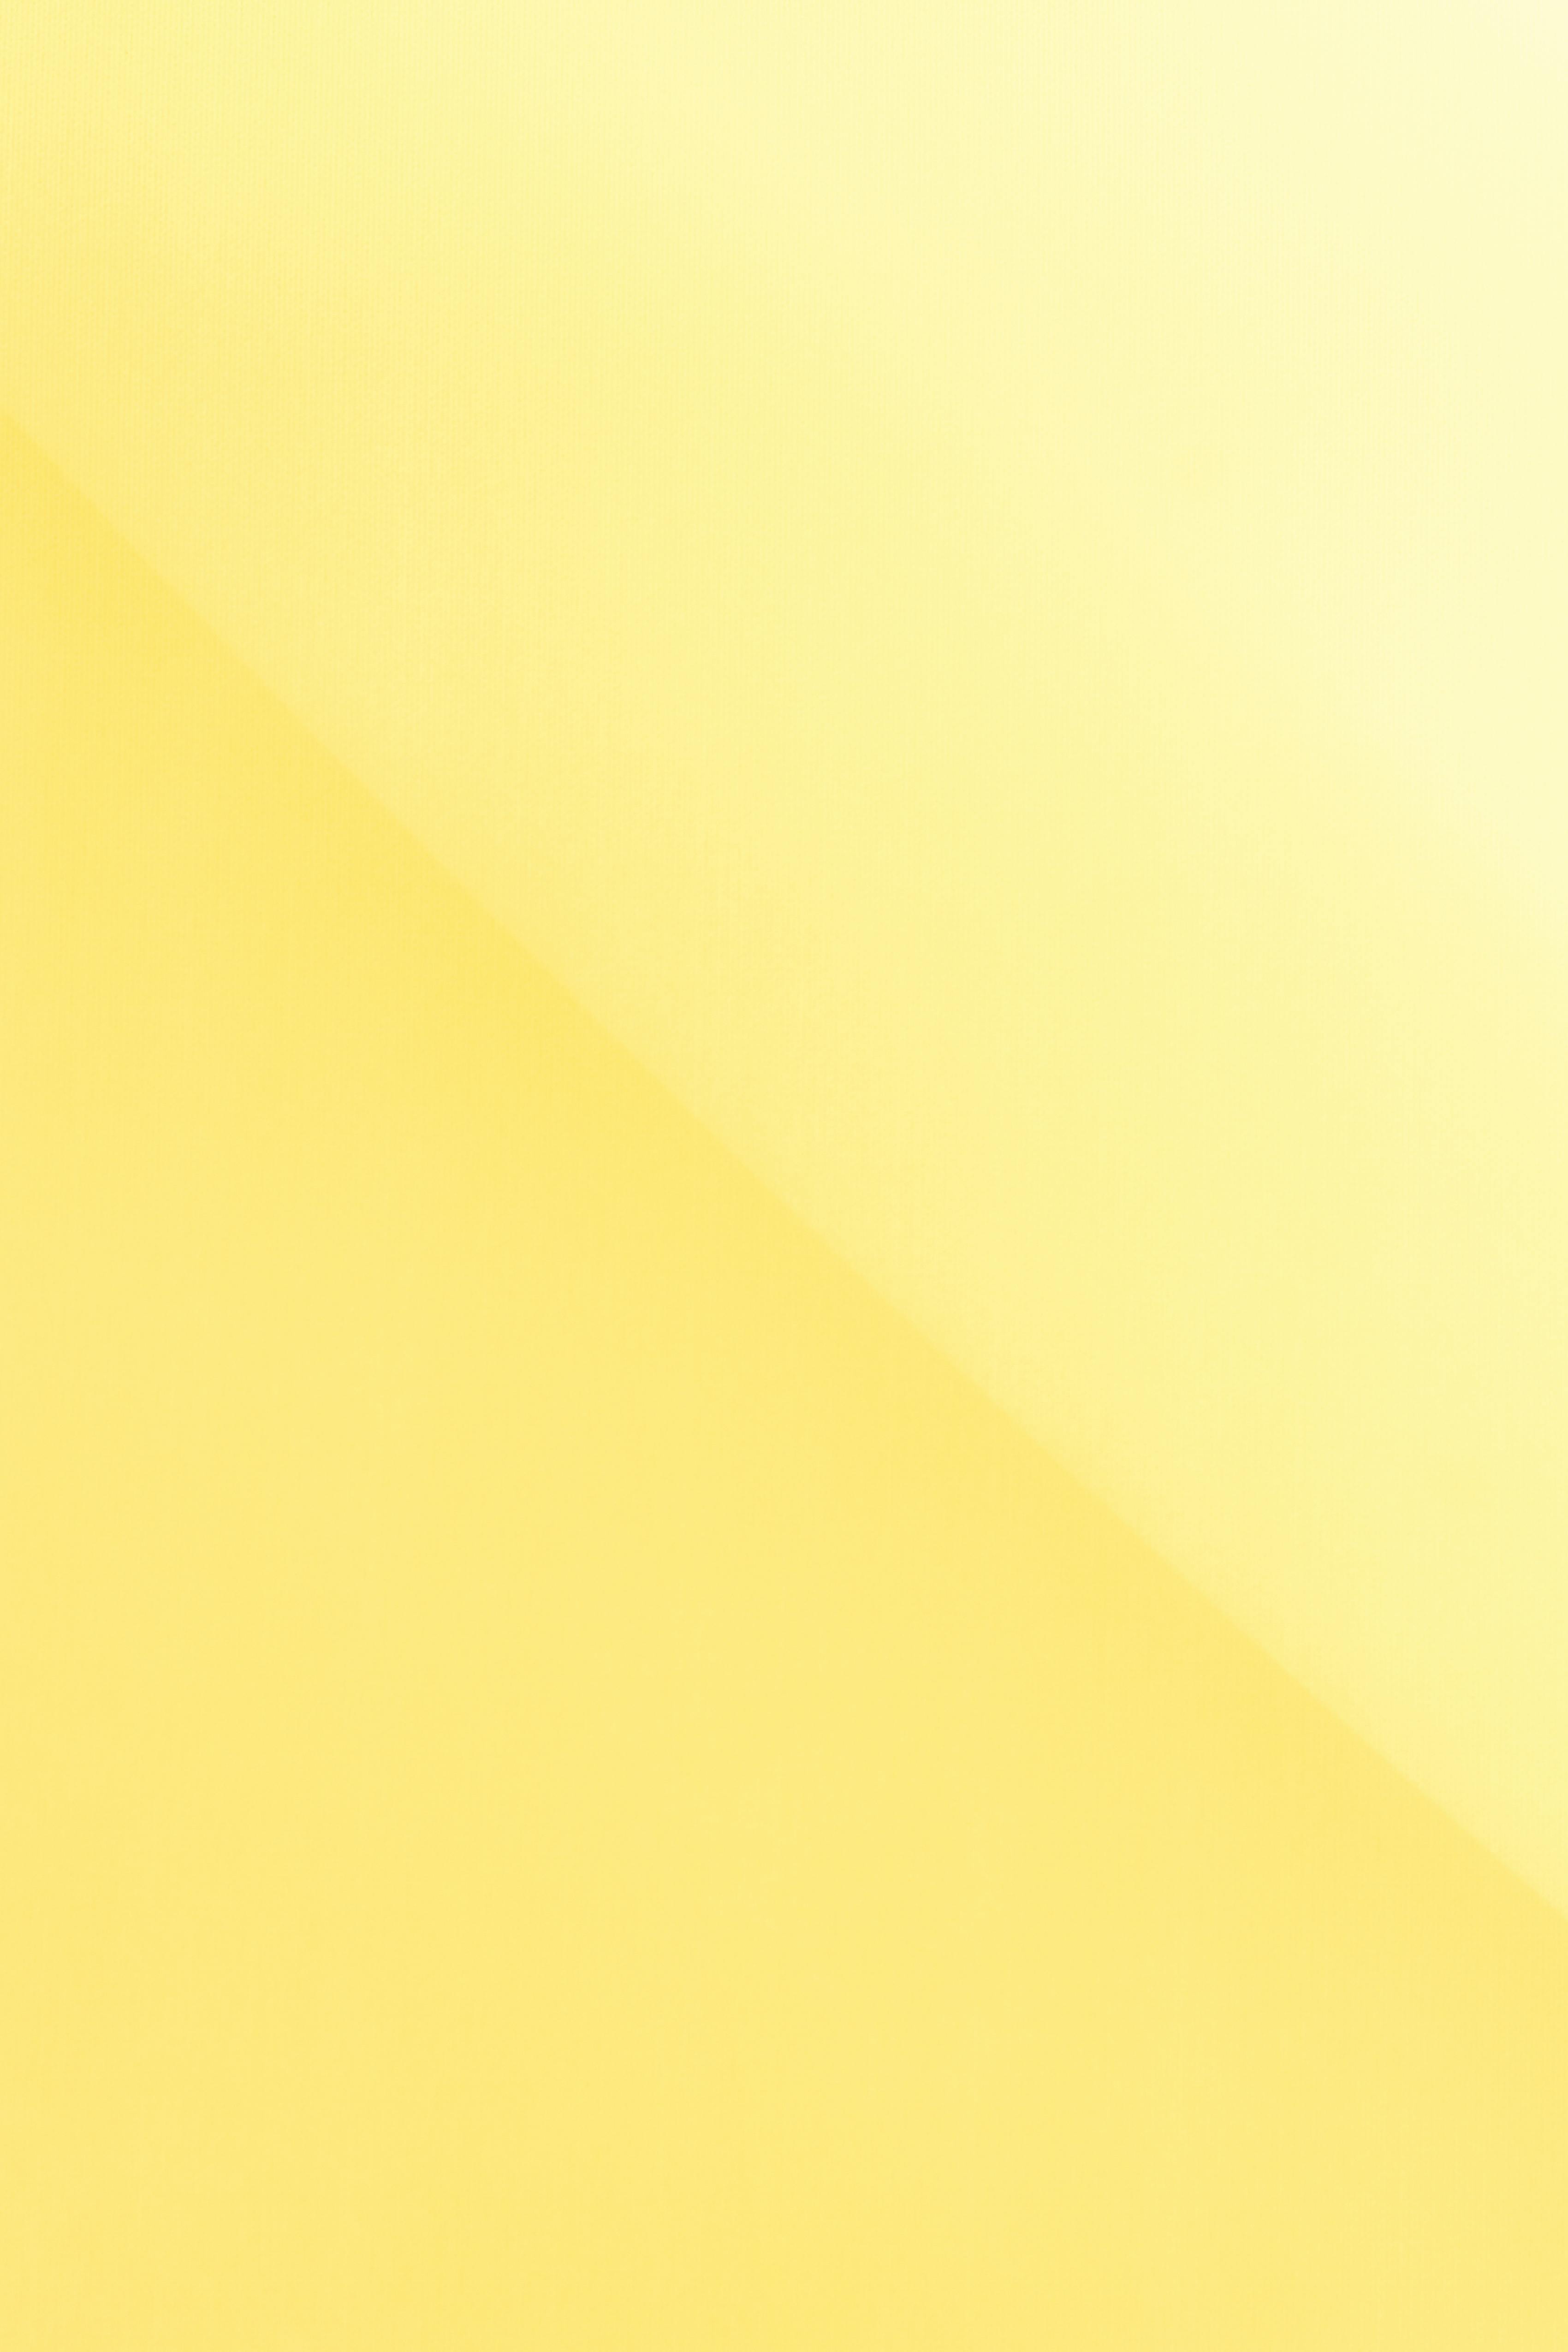 Bright yellow background with contrast diagonal line · Free Stock Photo